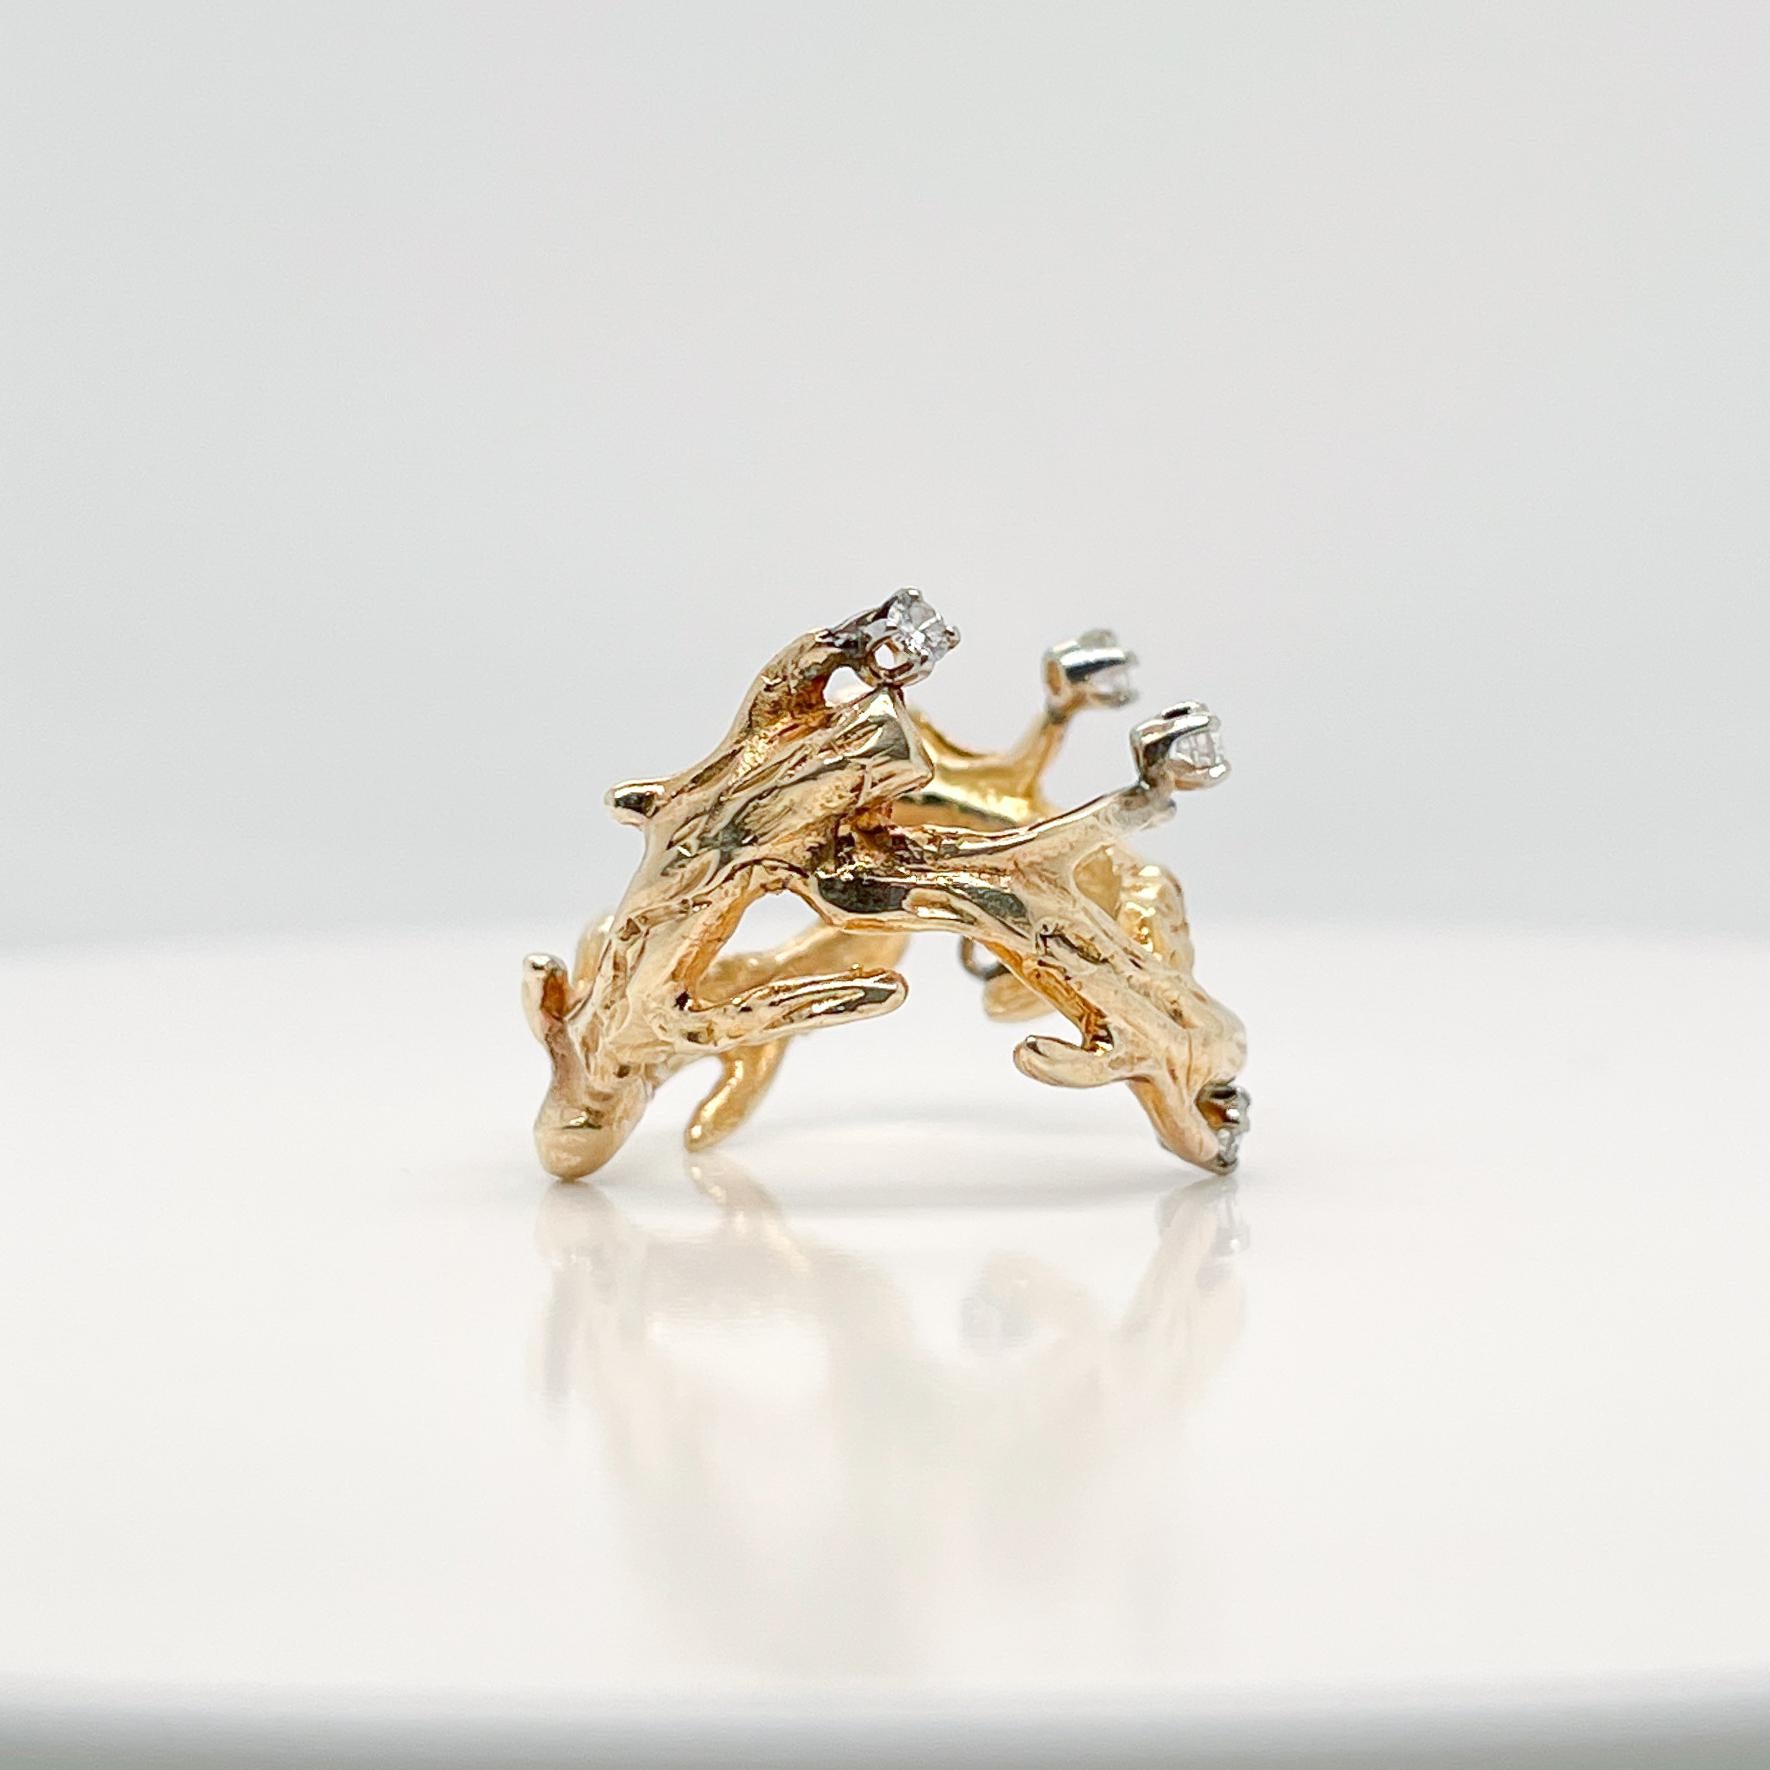 Modernist Studio Handcrafted 10 Karat Gold & Diamond Ring In Good Condition For Sale In Philadelphia, PA